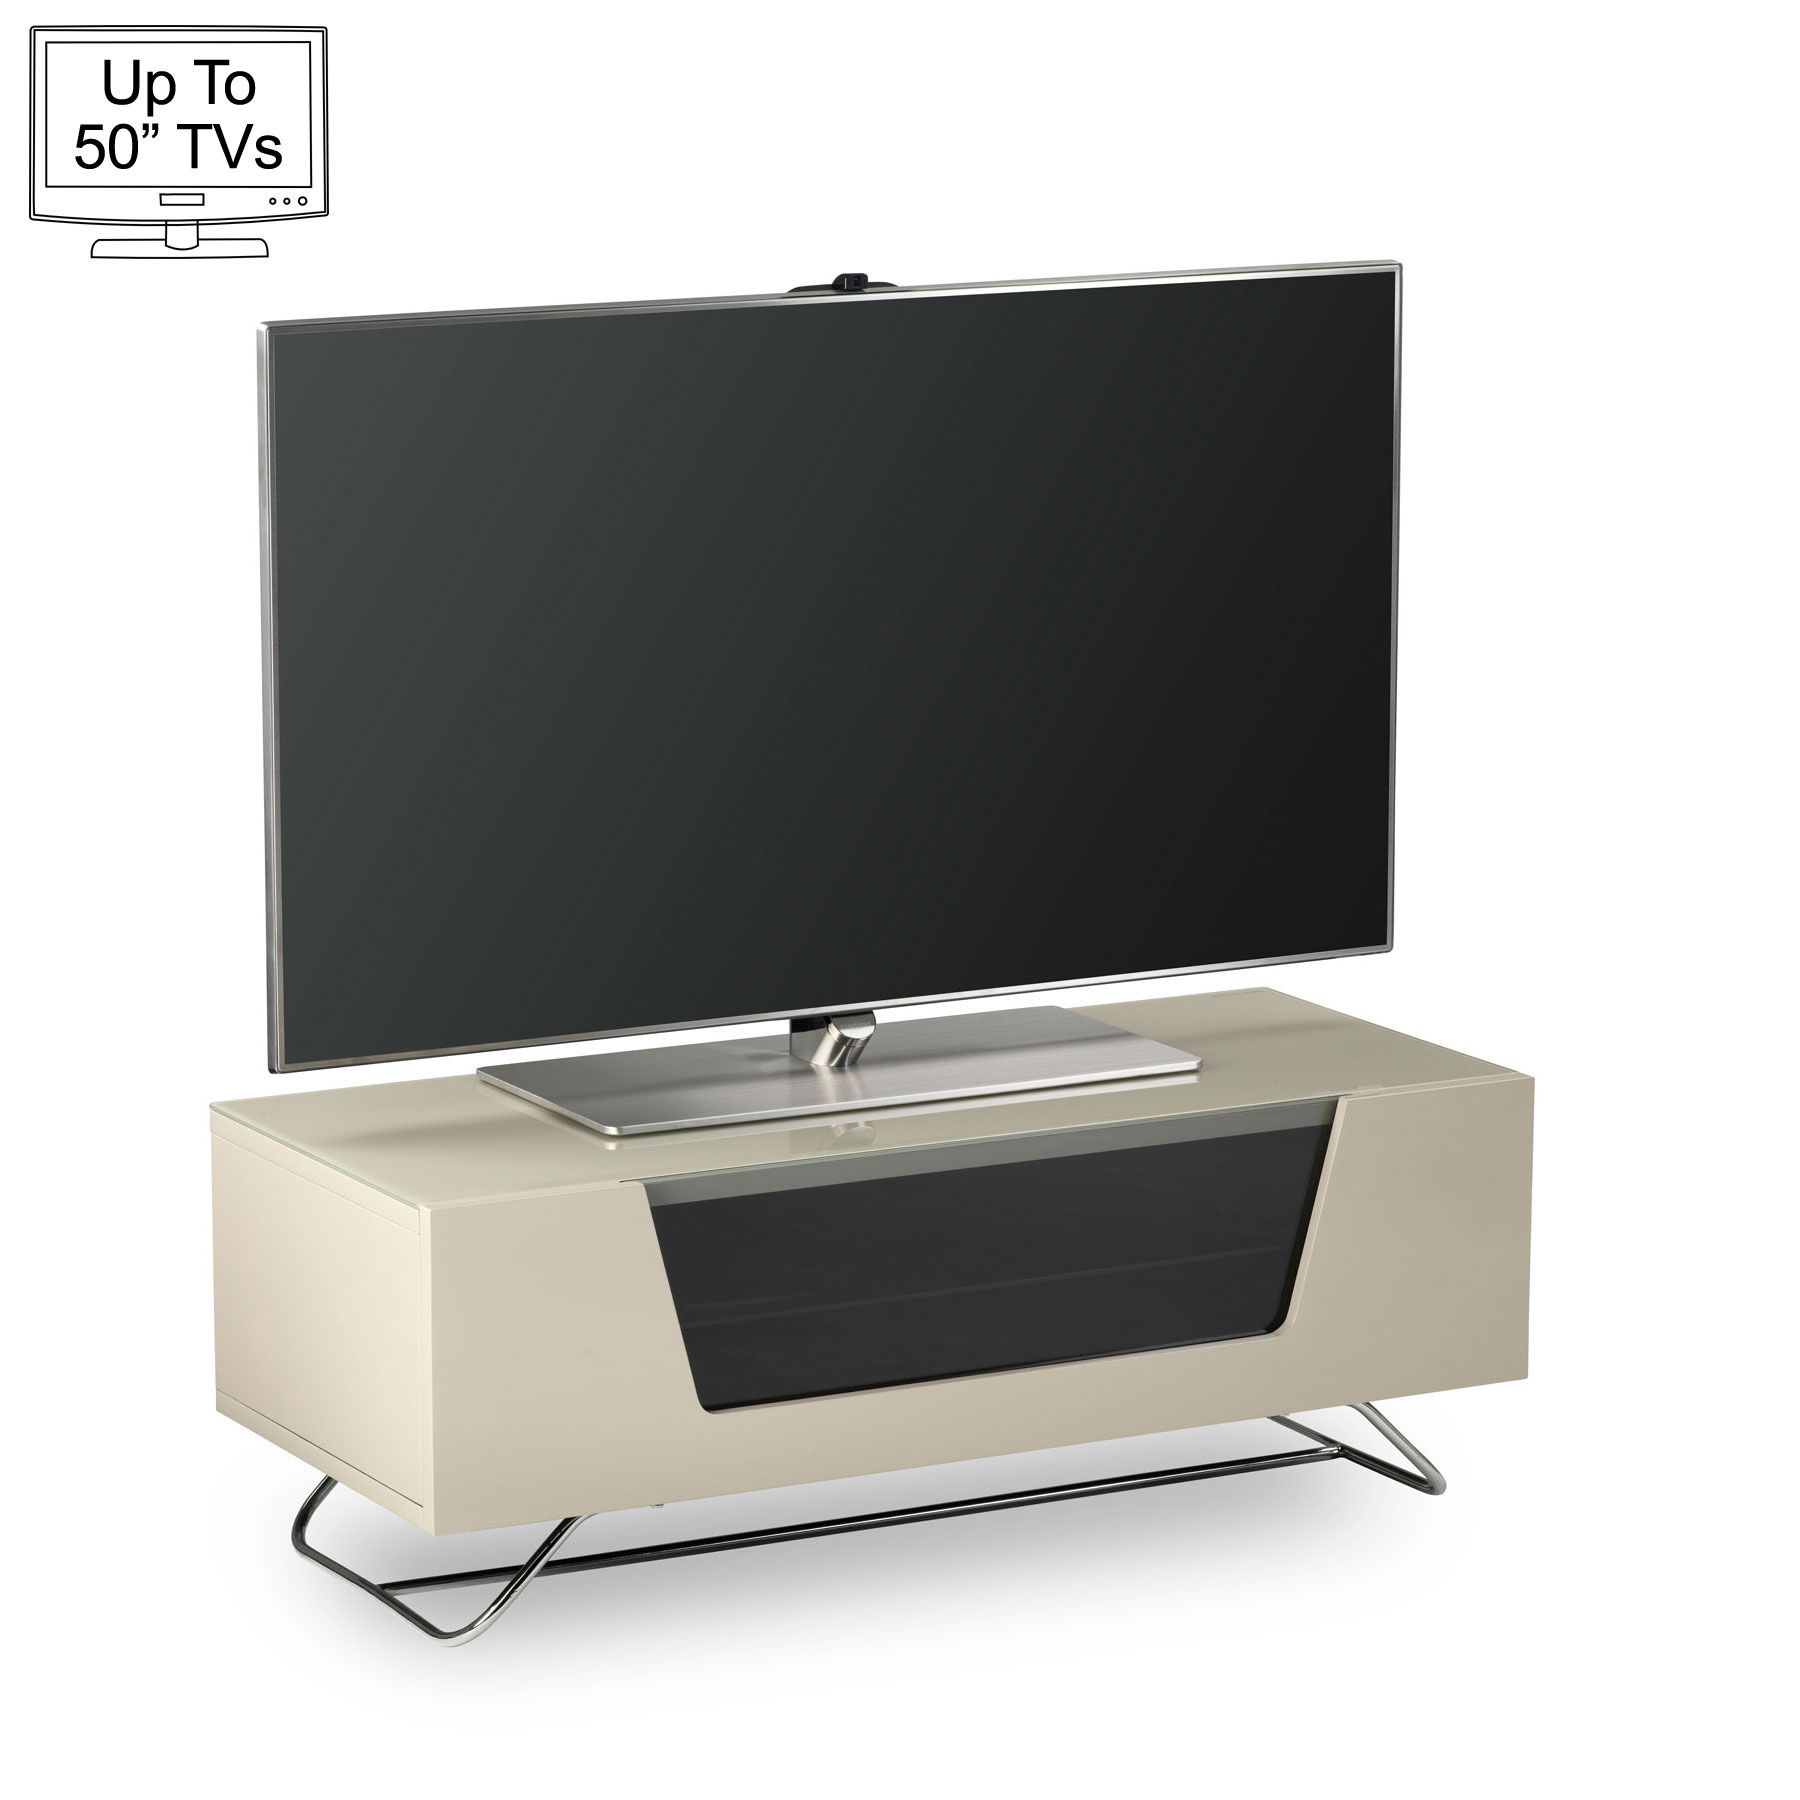 Alphason Chromium 2 100cm Ivory Tv Stand For Up To 50" Tvs For Tv Stand 100cm (View 7 of 15)